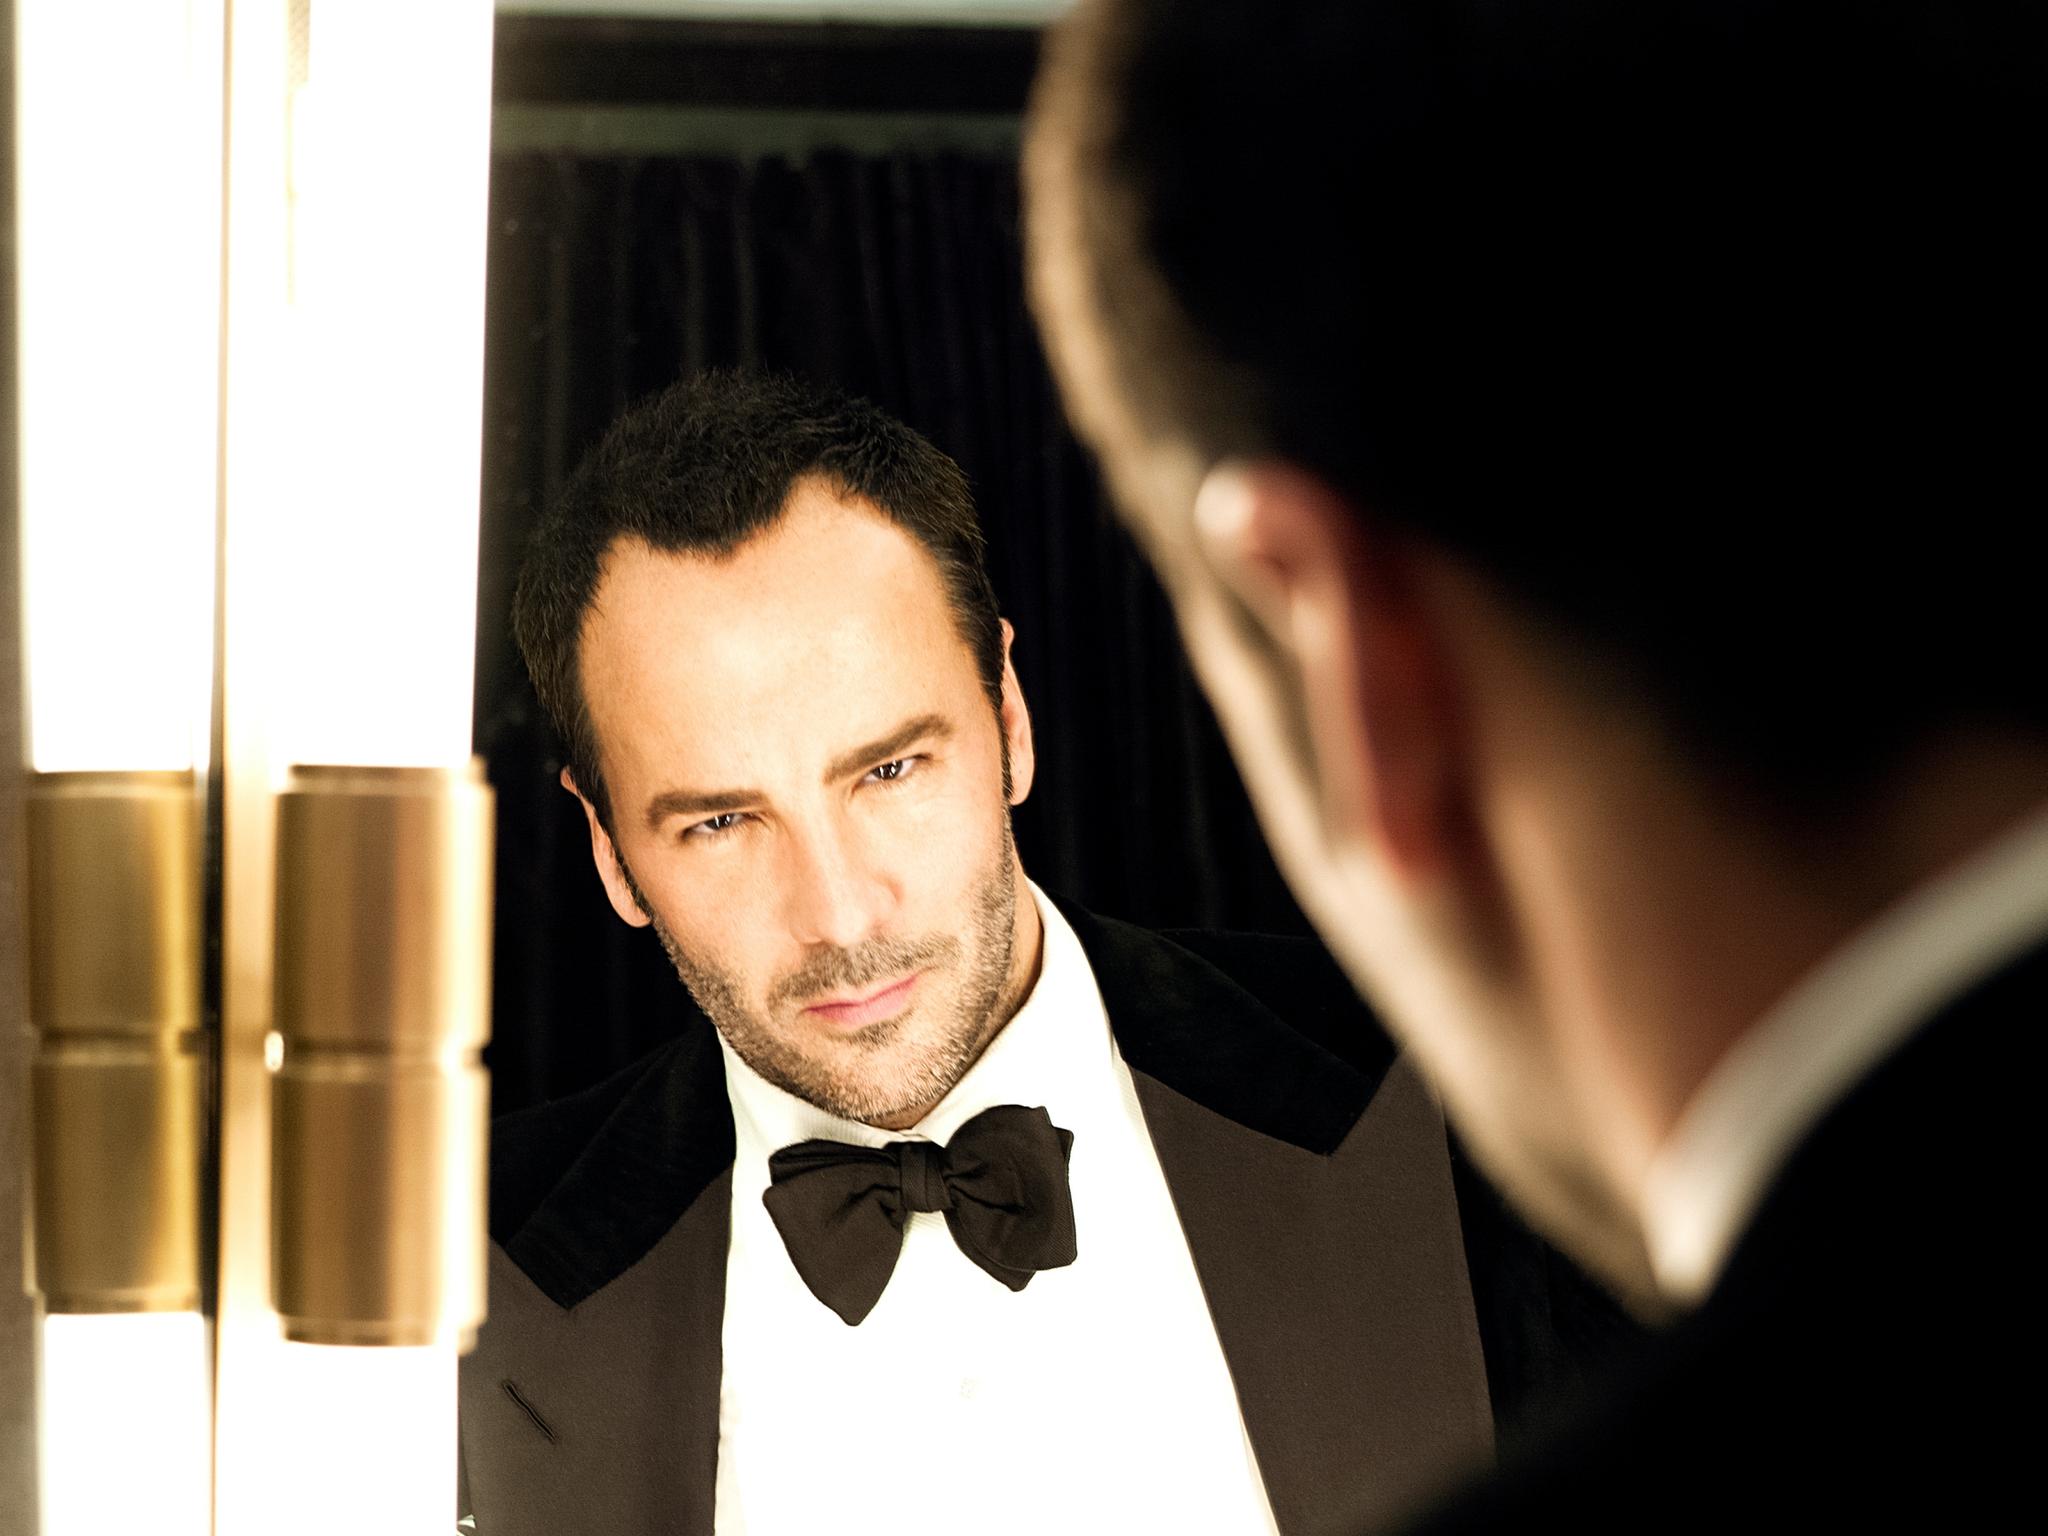 New book: Designer Tom Ford on regrets, Gucci and the 'constant